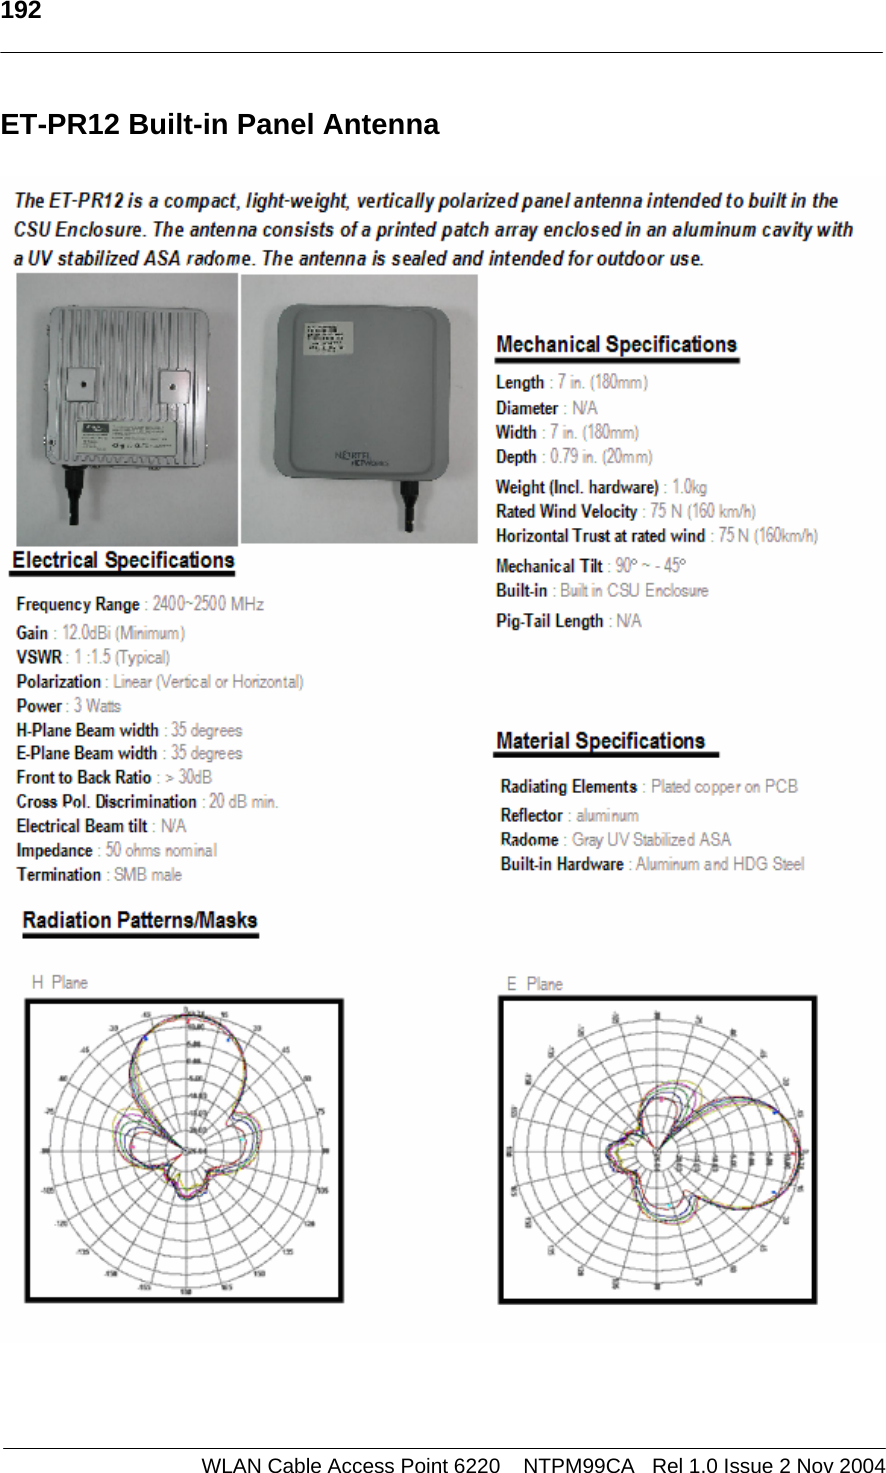   192   WLAN Cable Access Point 6220    NTPM99CA   Rel 1.0 Issue 2 Nov 2004 ET-PR12 Built-in Panel Antenna   